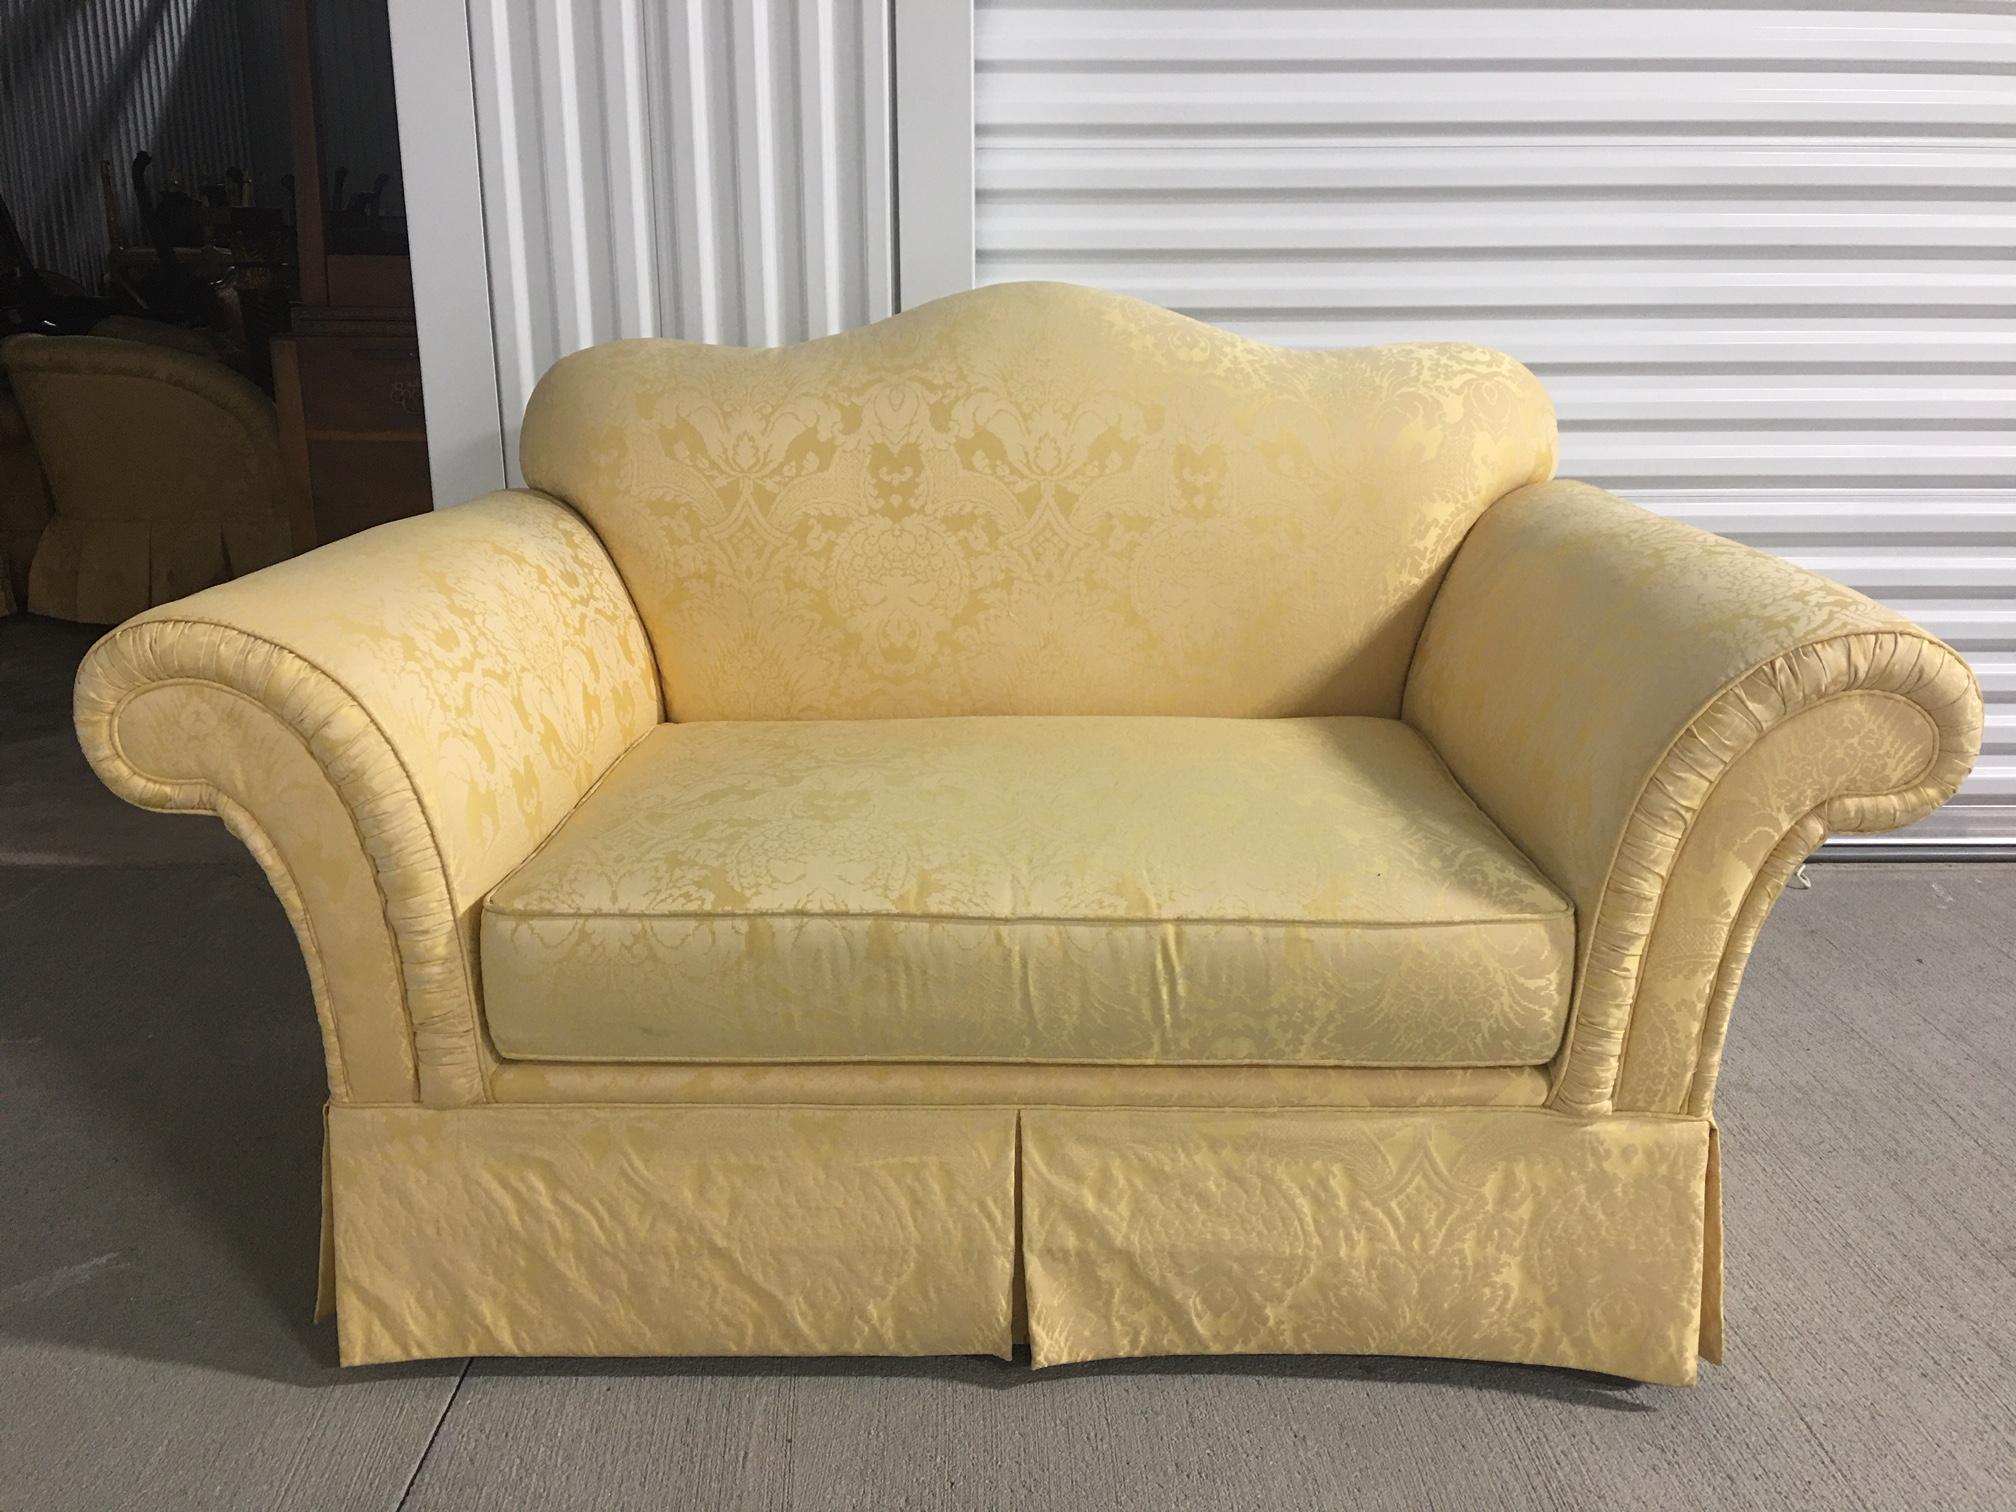 Upholstered Loveseat in a Yellow Damask Fabric, 20th Century 1